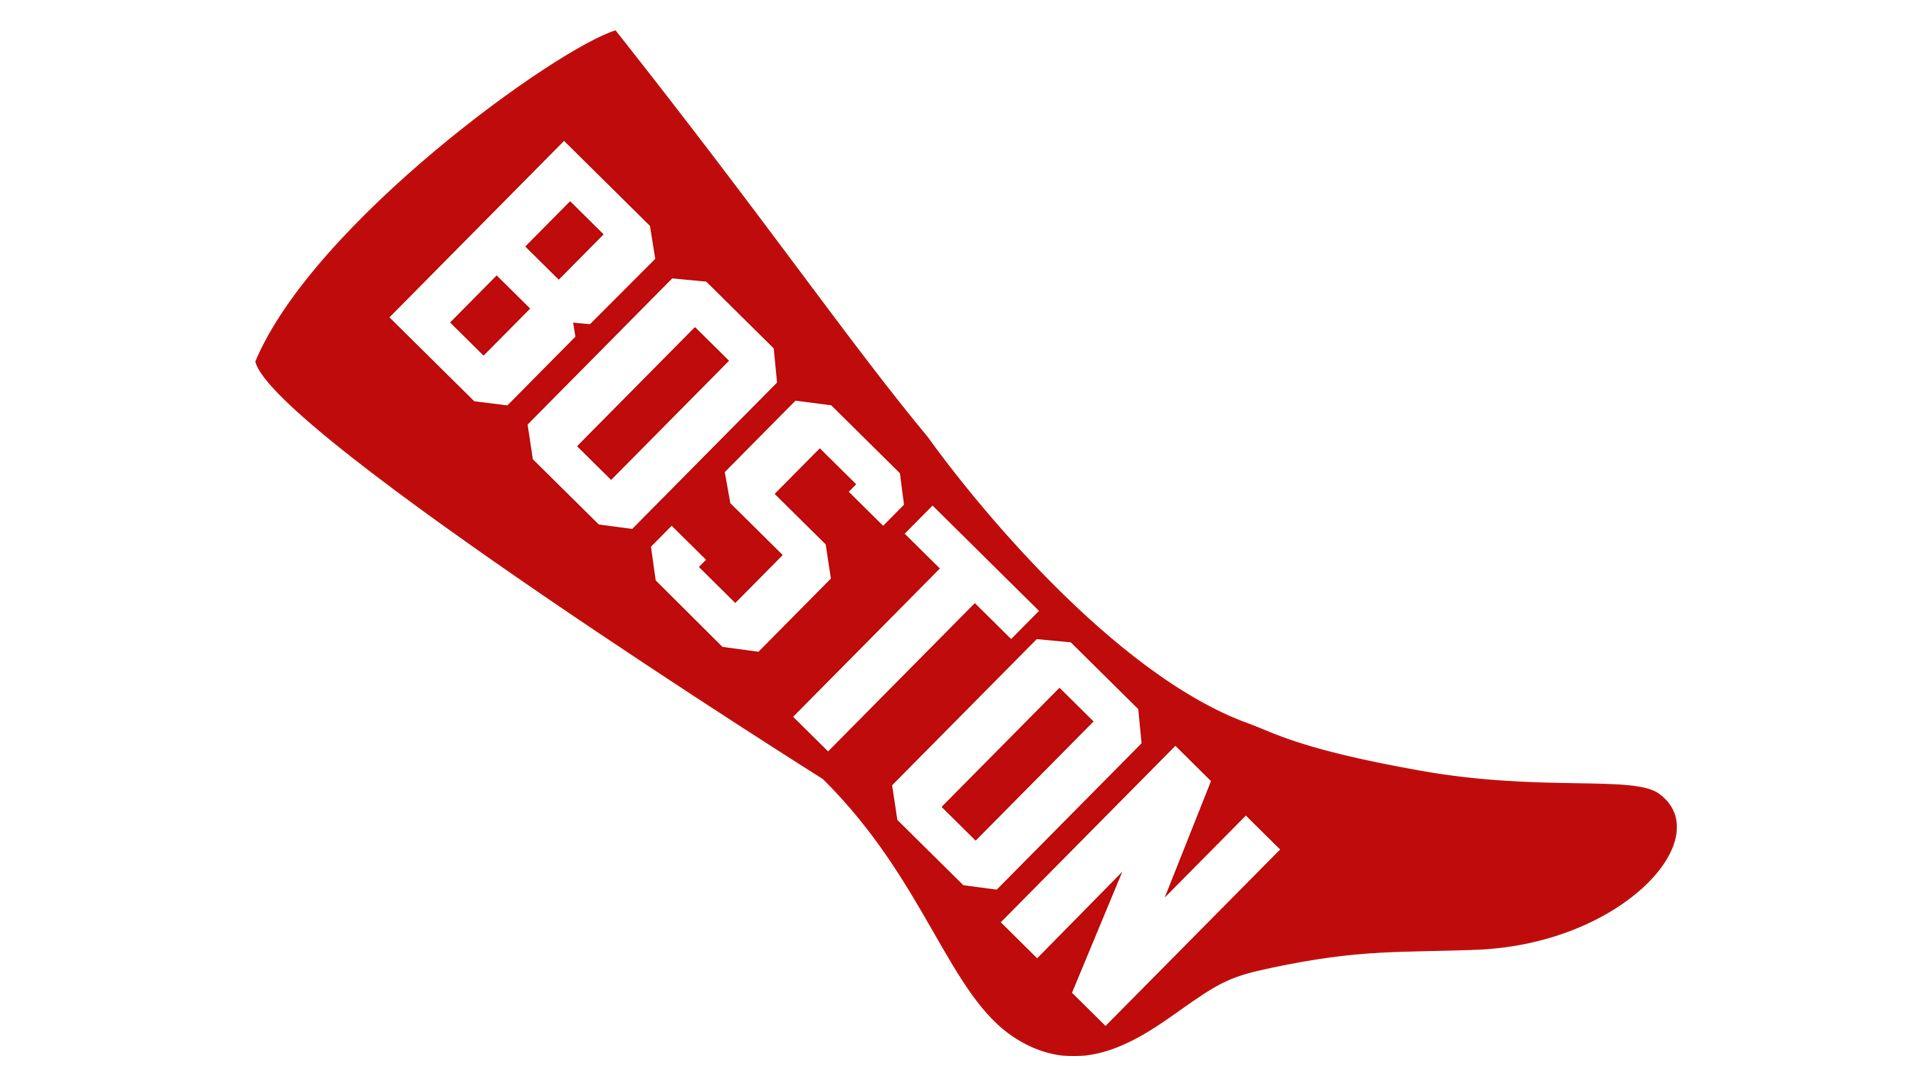 Red Socks Logo - Boston Red Sox Logo, Boston Red Sox Symbol Meaning, History and ...